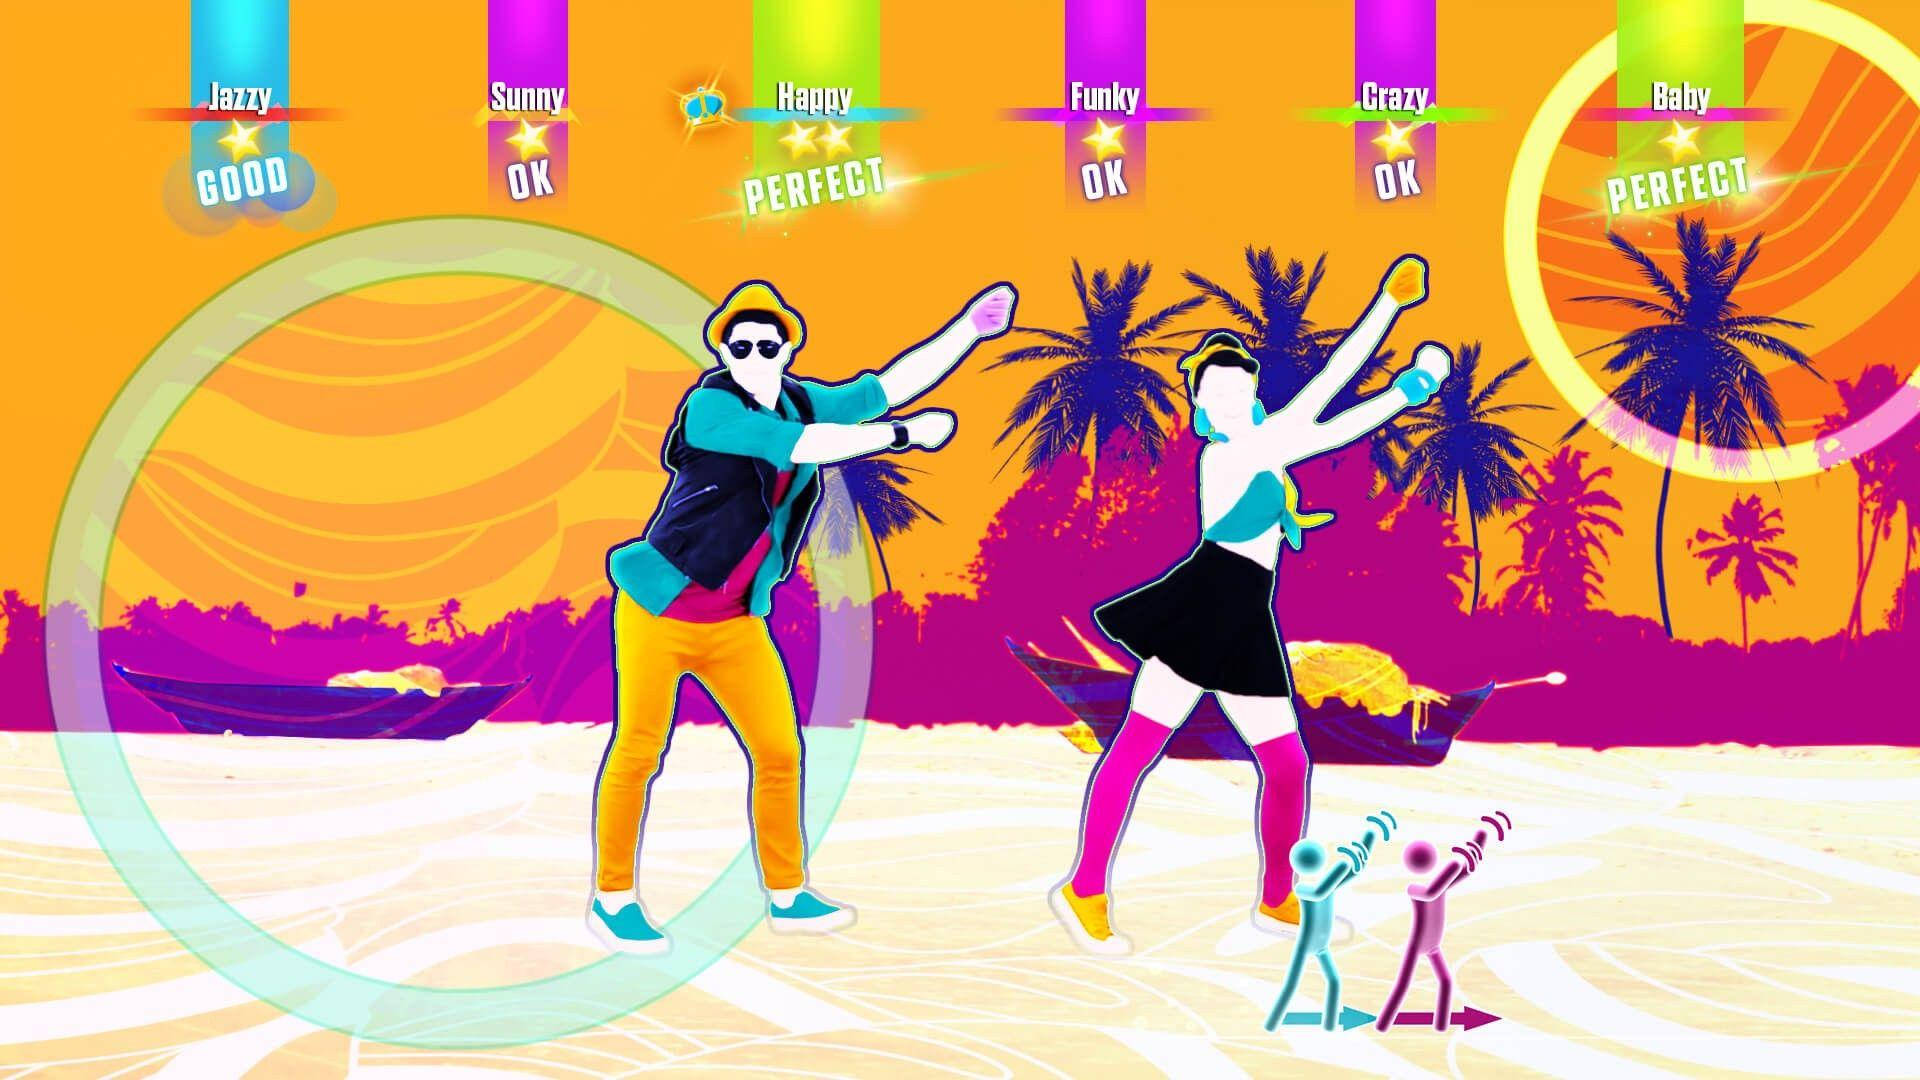 Just Dance 2017 Dancers On The Beach Background